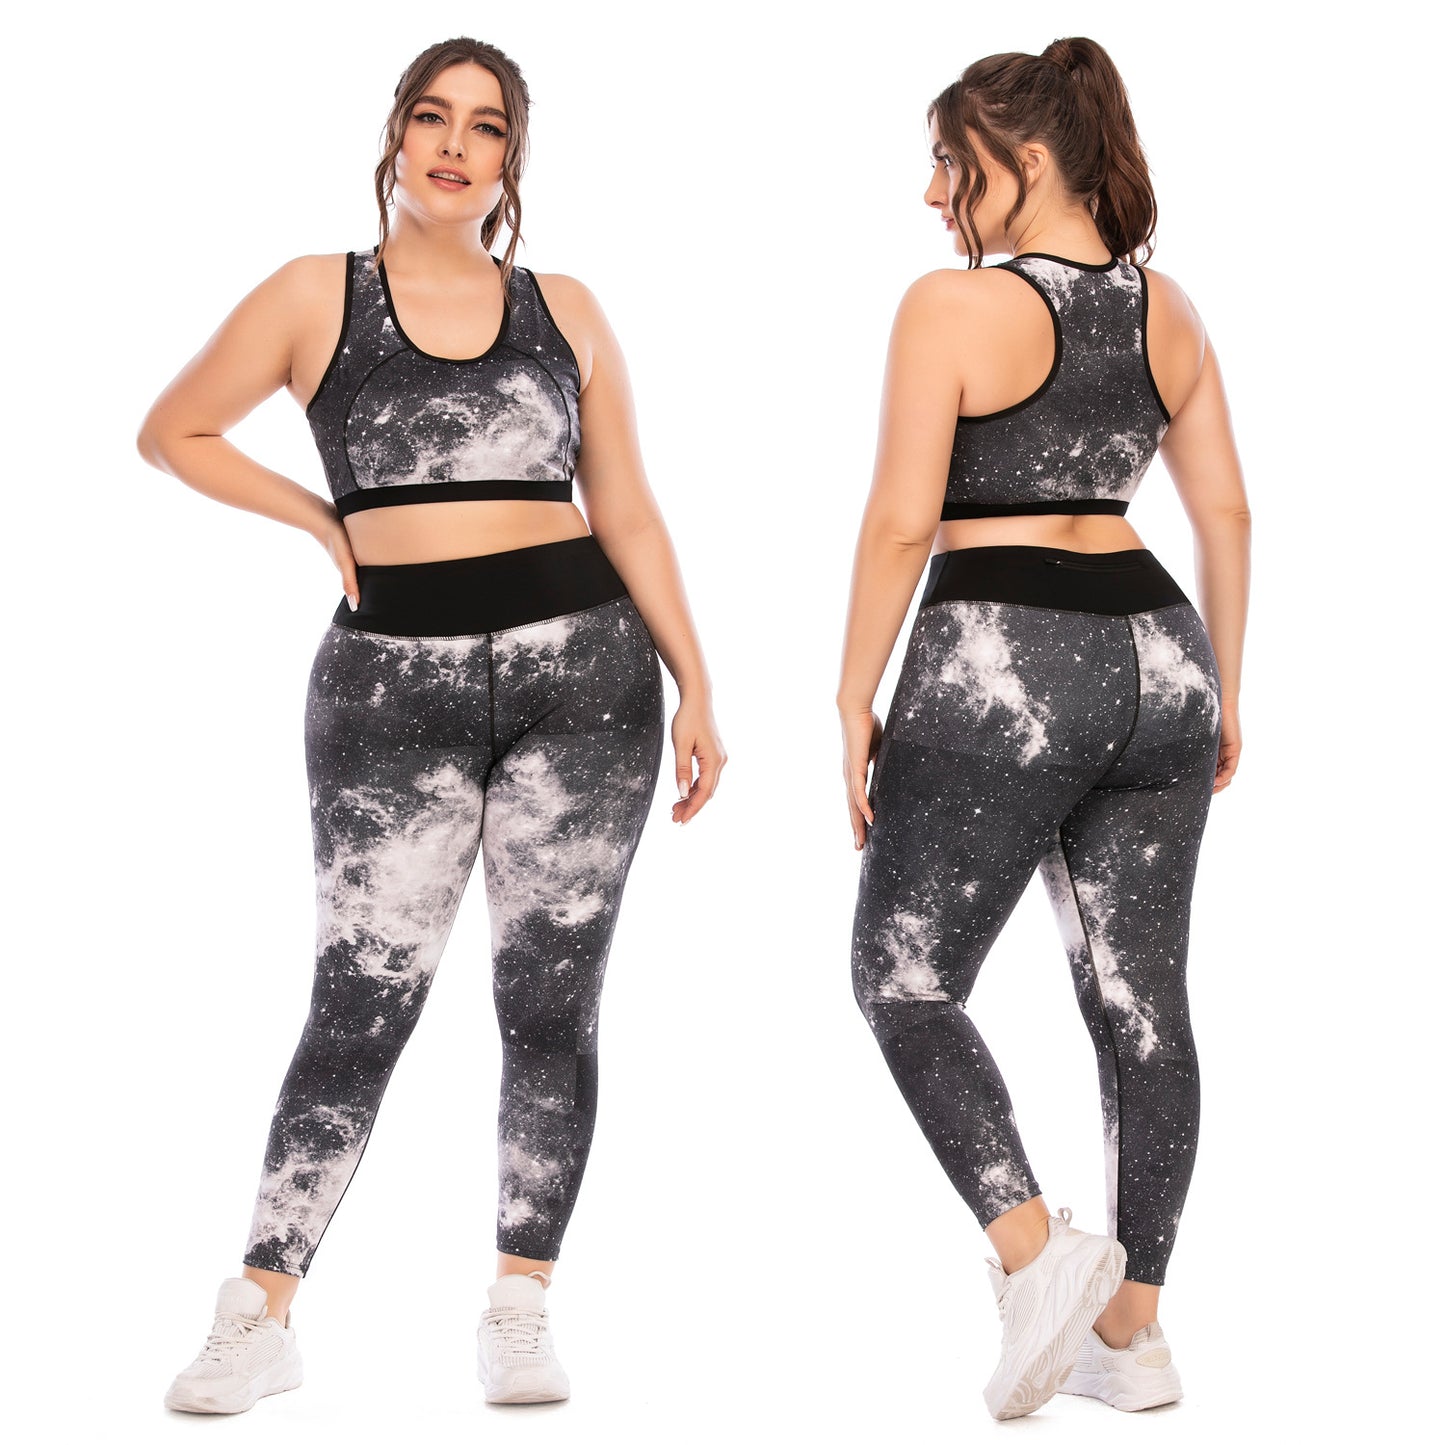 Plus Size Doing Exercise Yoga Suits and Activewear--Free Shipping at meselling99